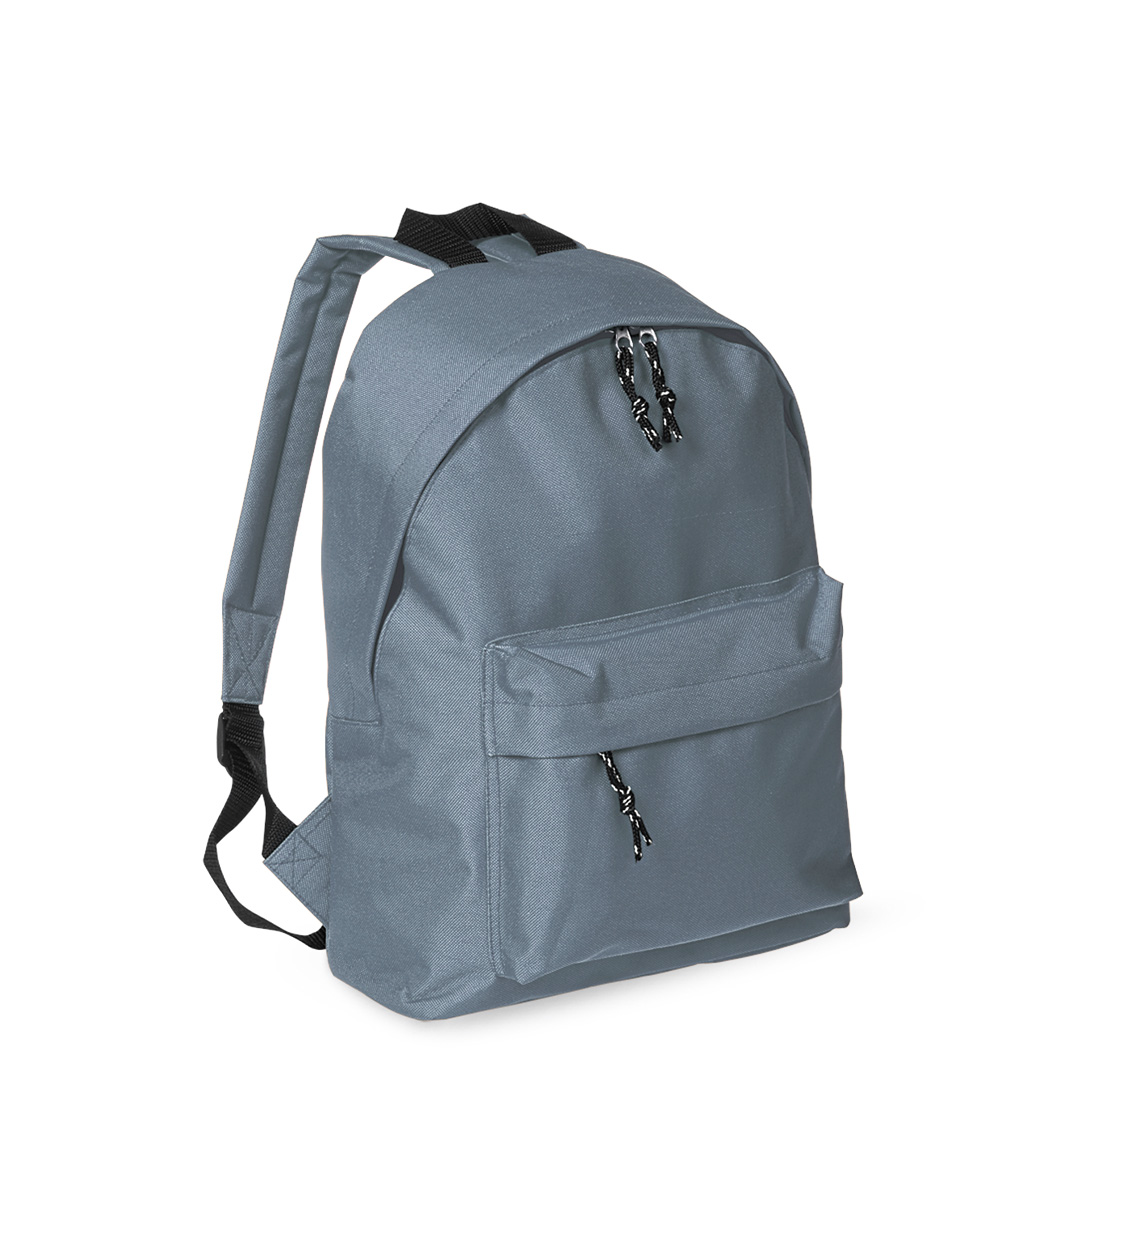 Discovery backpack - grey